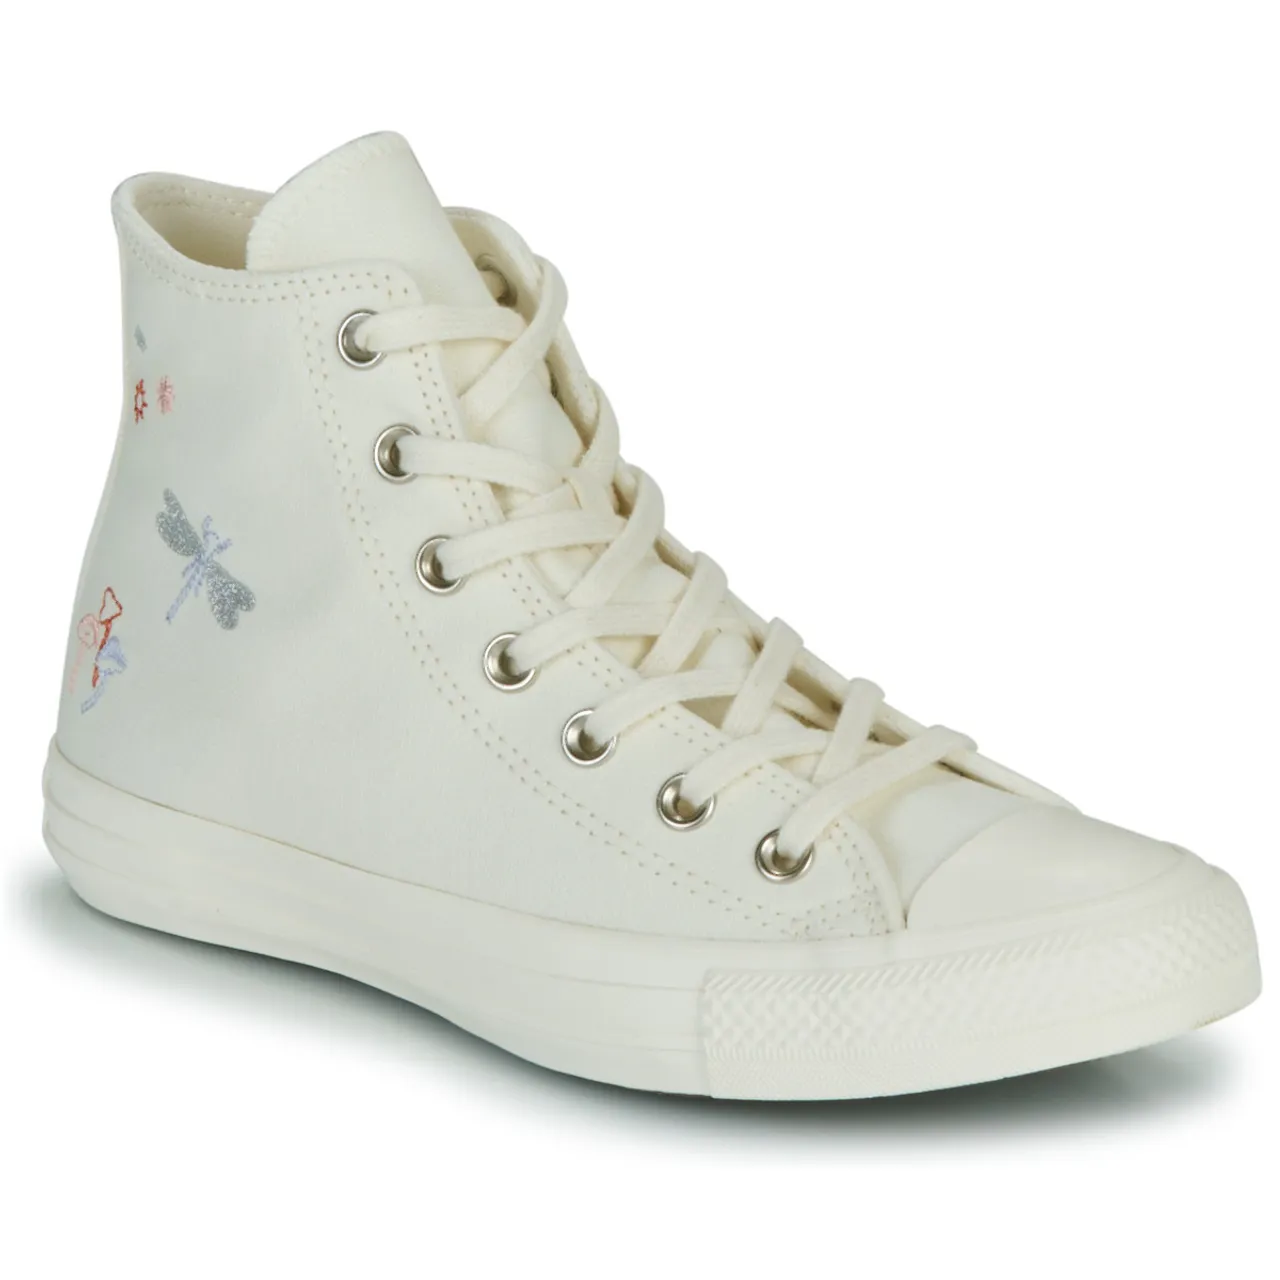 Converse  CHUCK TAYLOR ALL STAR  women's Shoes (High-top Trainers) in White